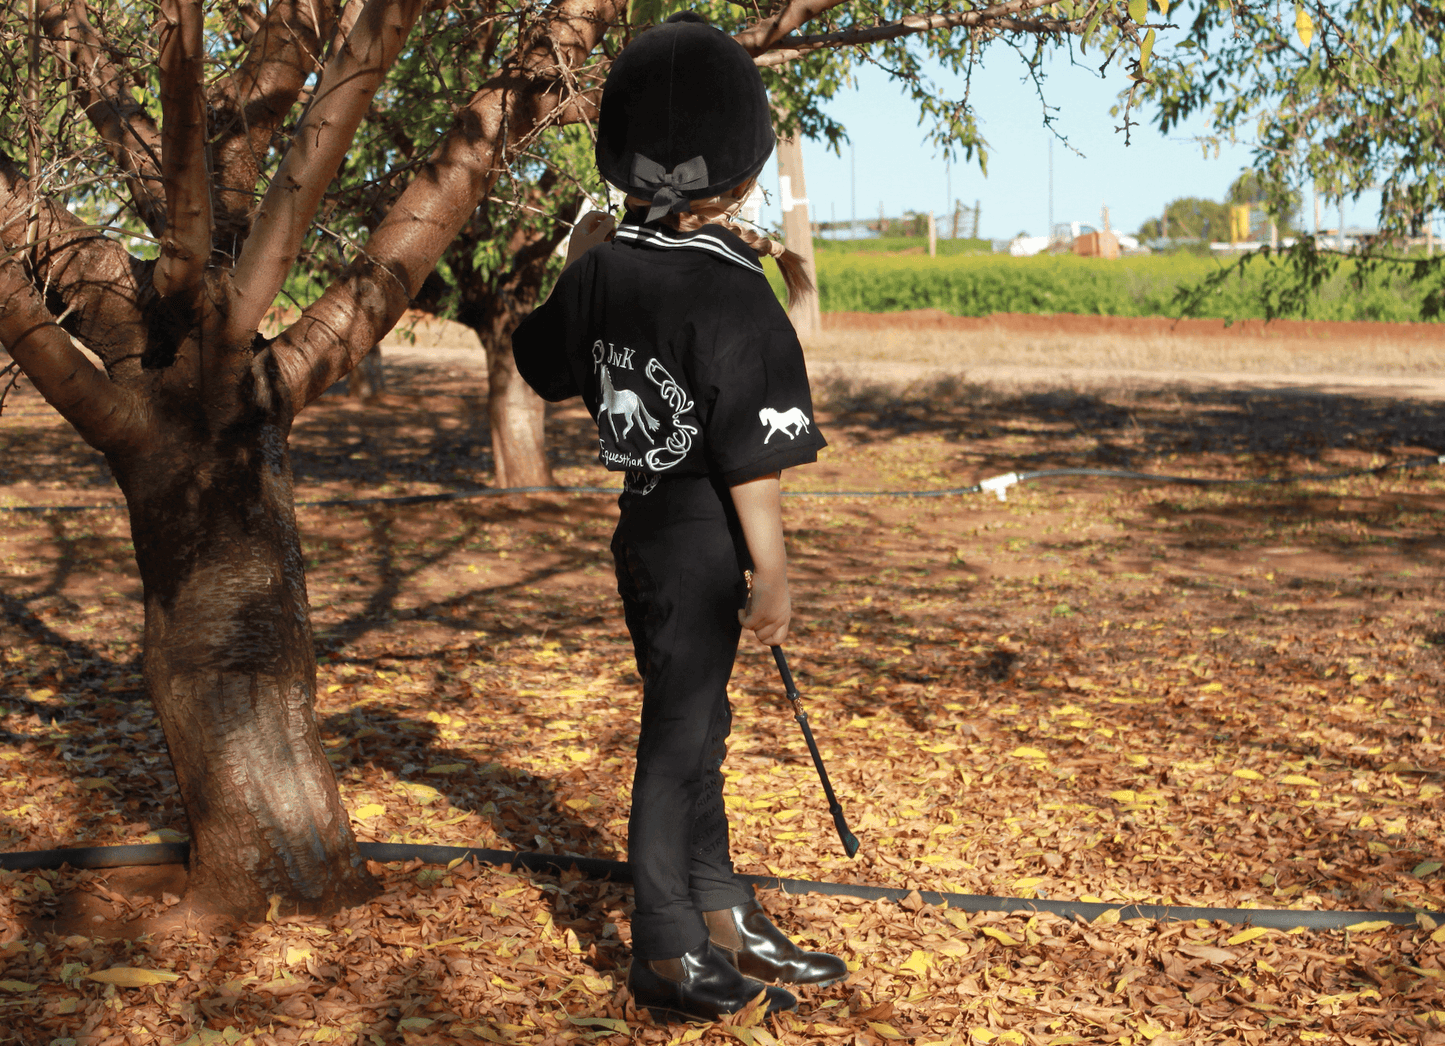 Child in horse riding tights stands near tree with riding crop.